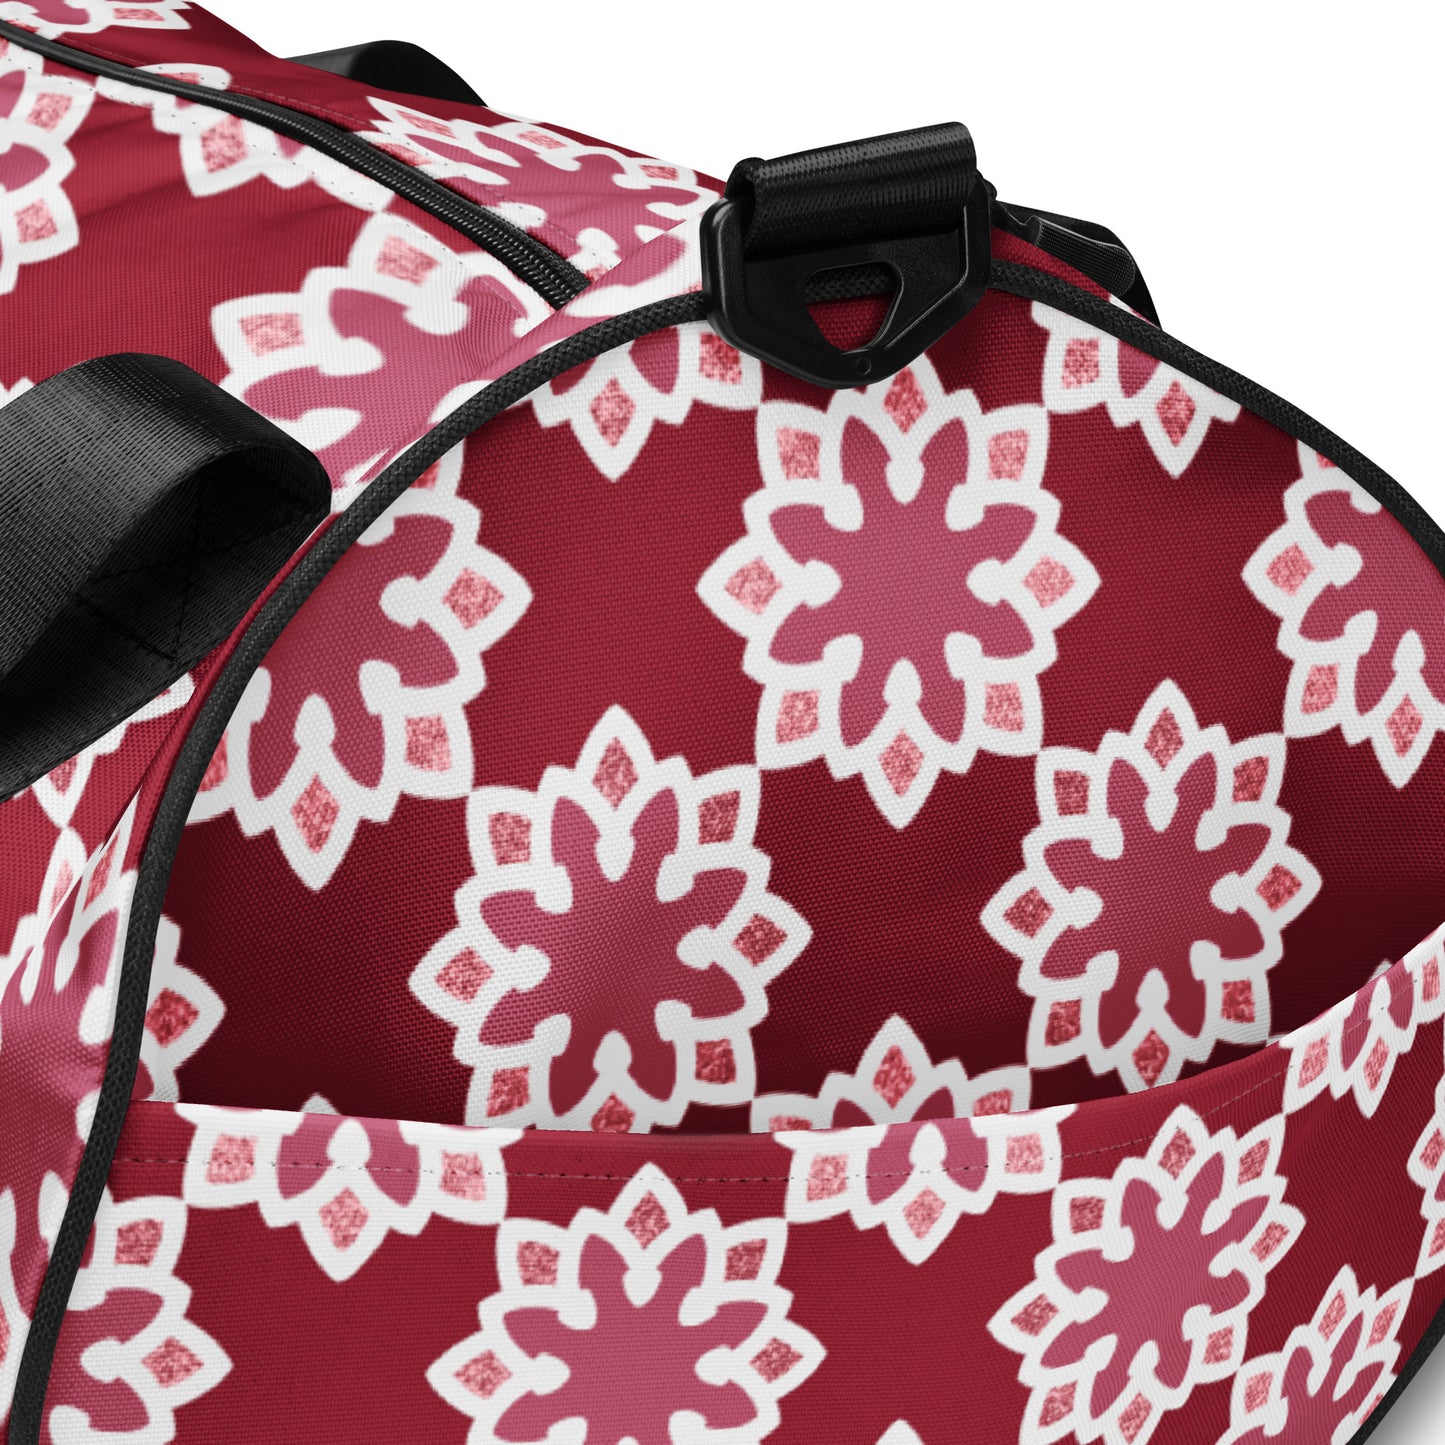 All-over print gym bag - Arabesque Flower in Rouge